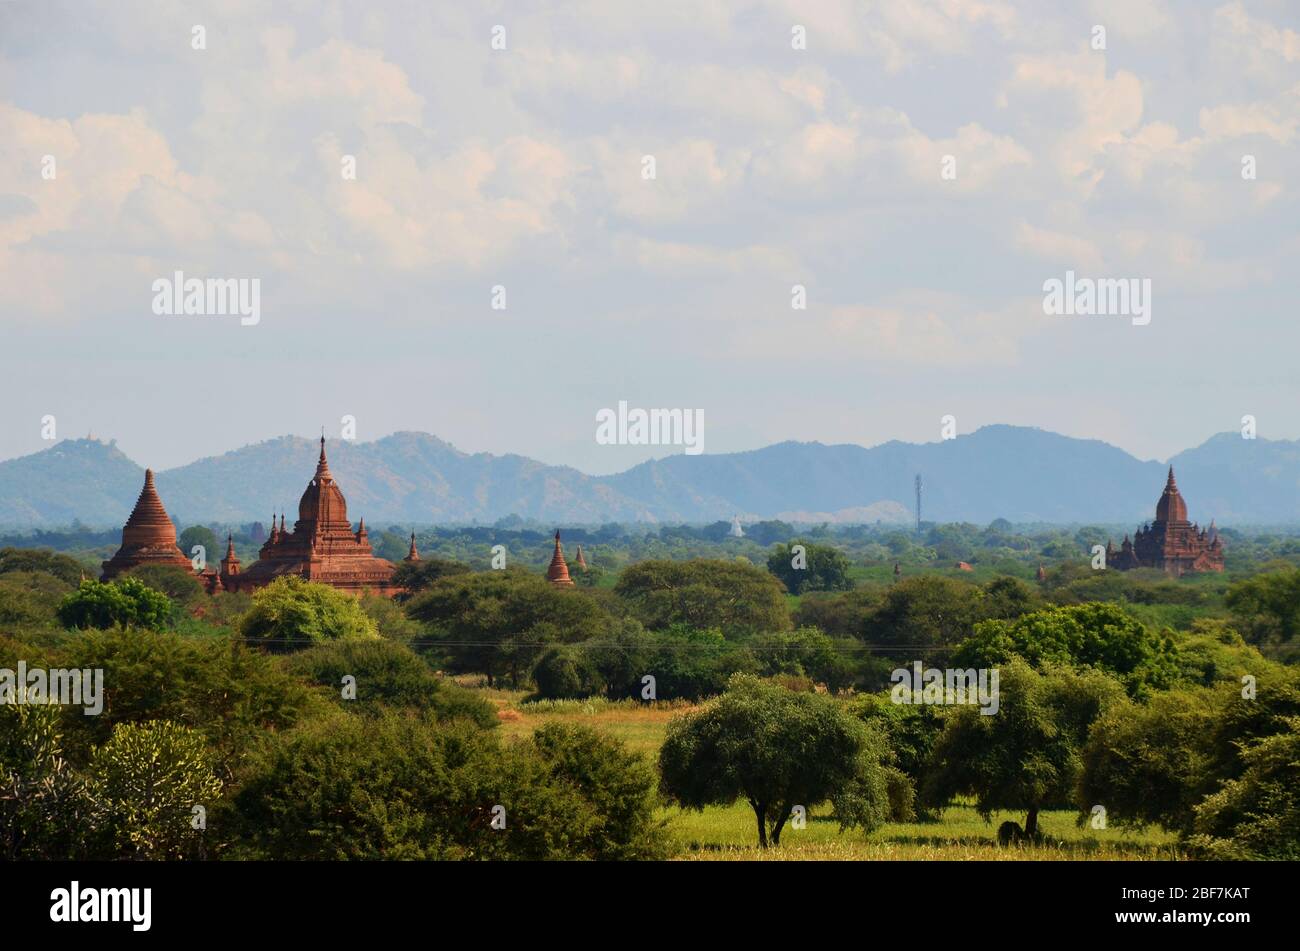 Red bricked temples in central plain Bagan Myanmar Stock Photo